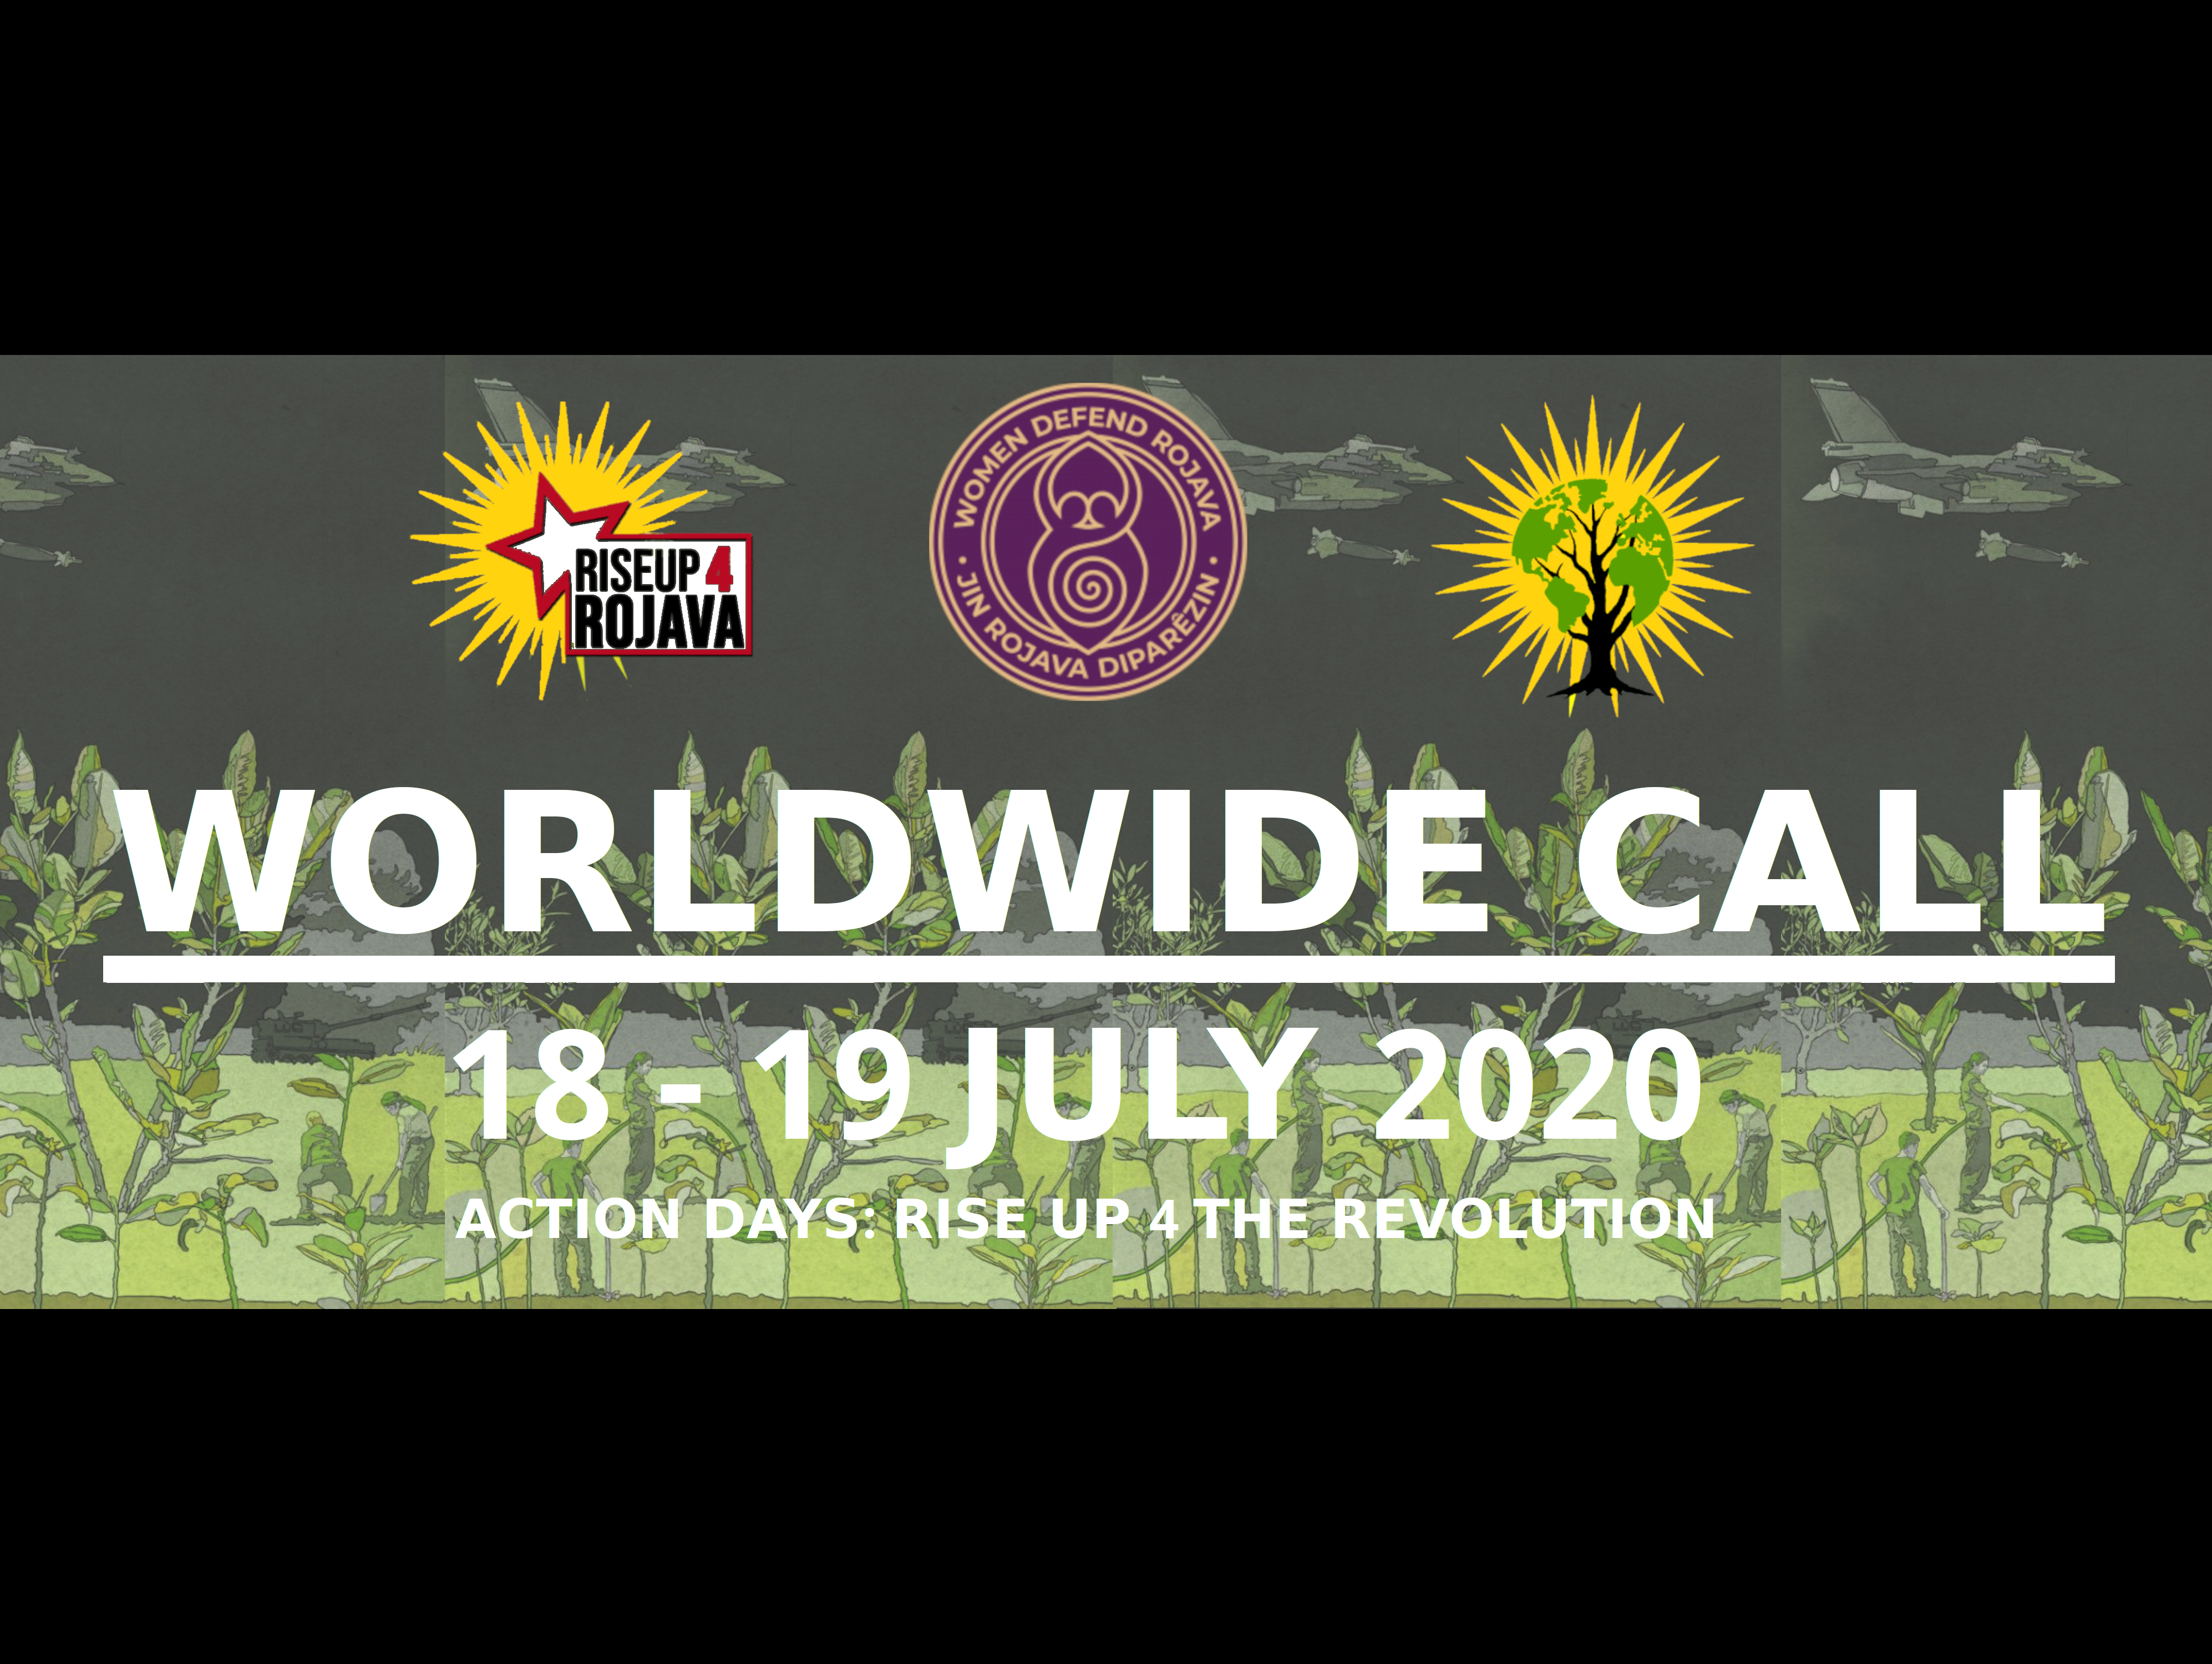 Global Call for Action Days on the 18 th and 19 th July